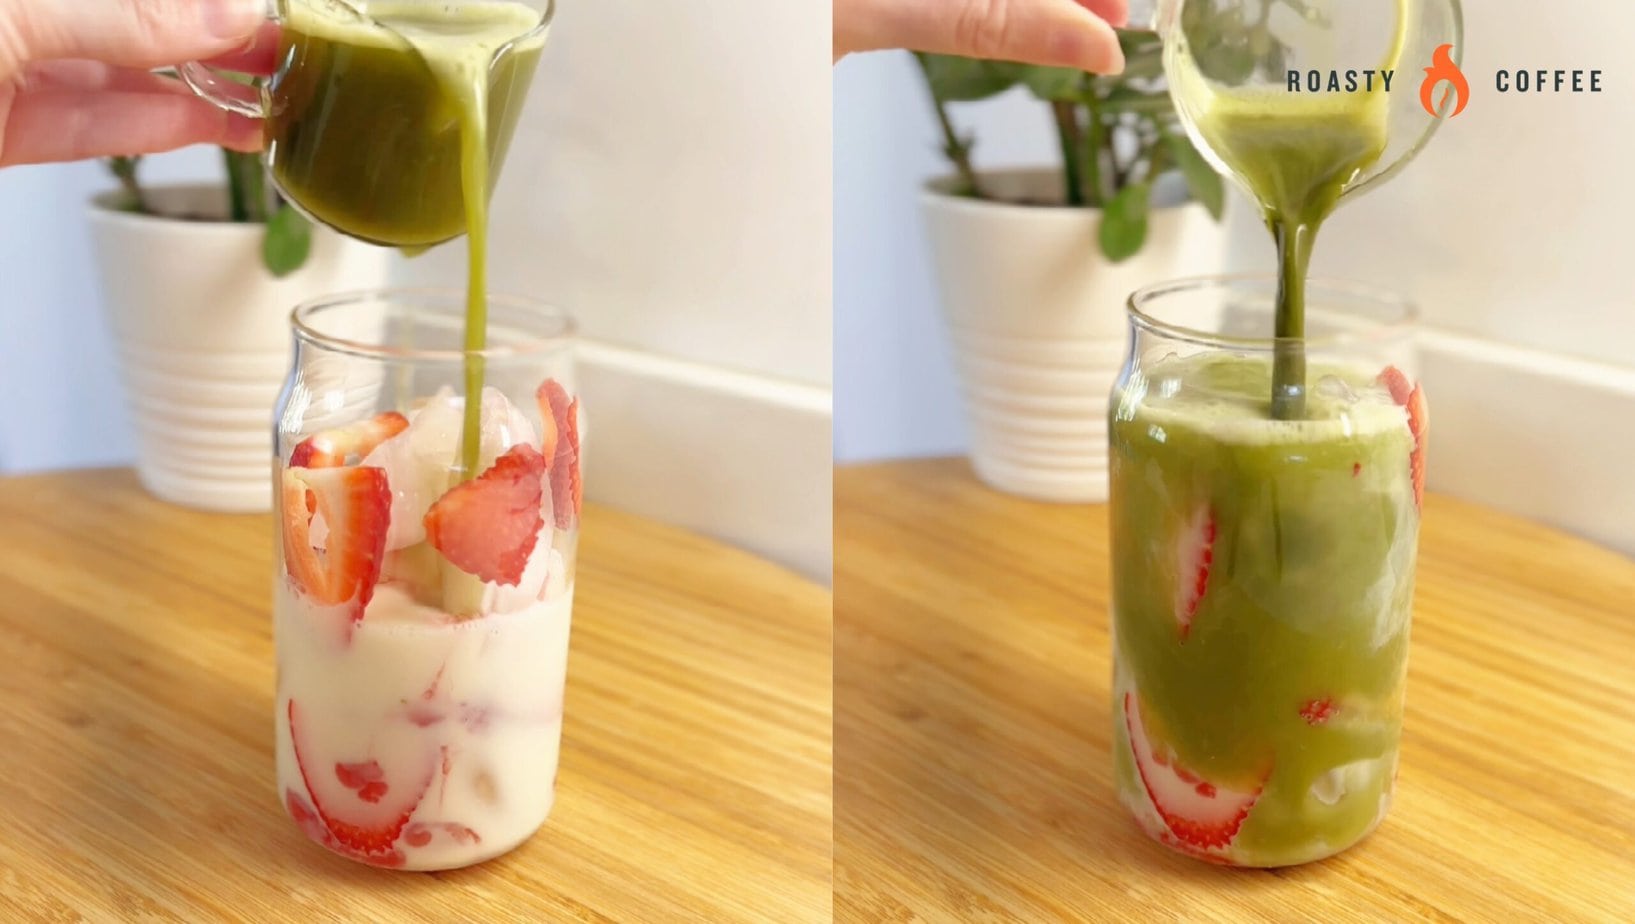 adding matcha into a glass with strawberry slices, milk and ice